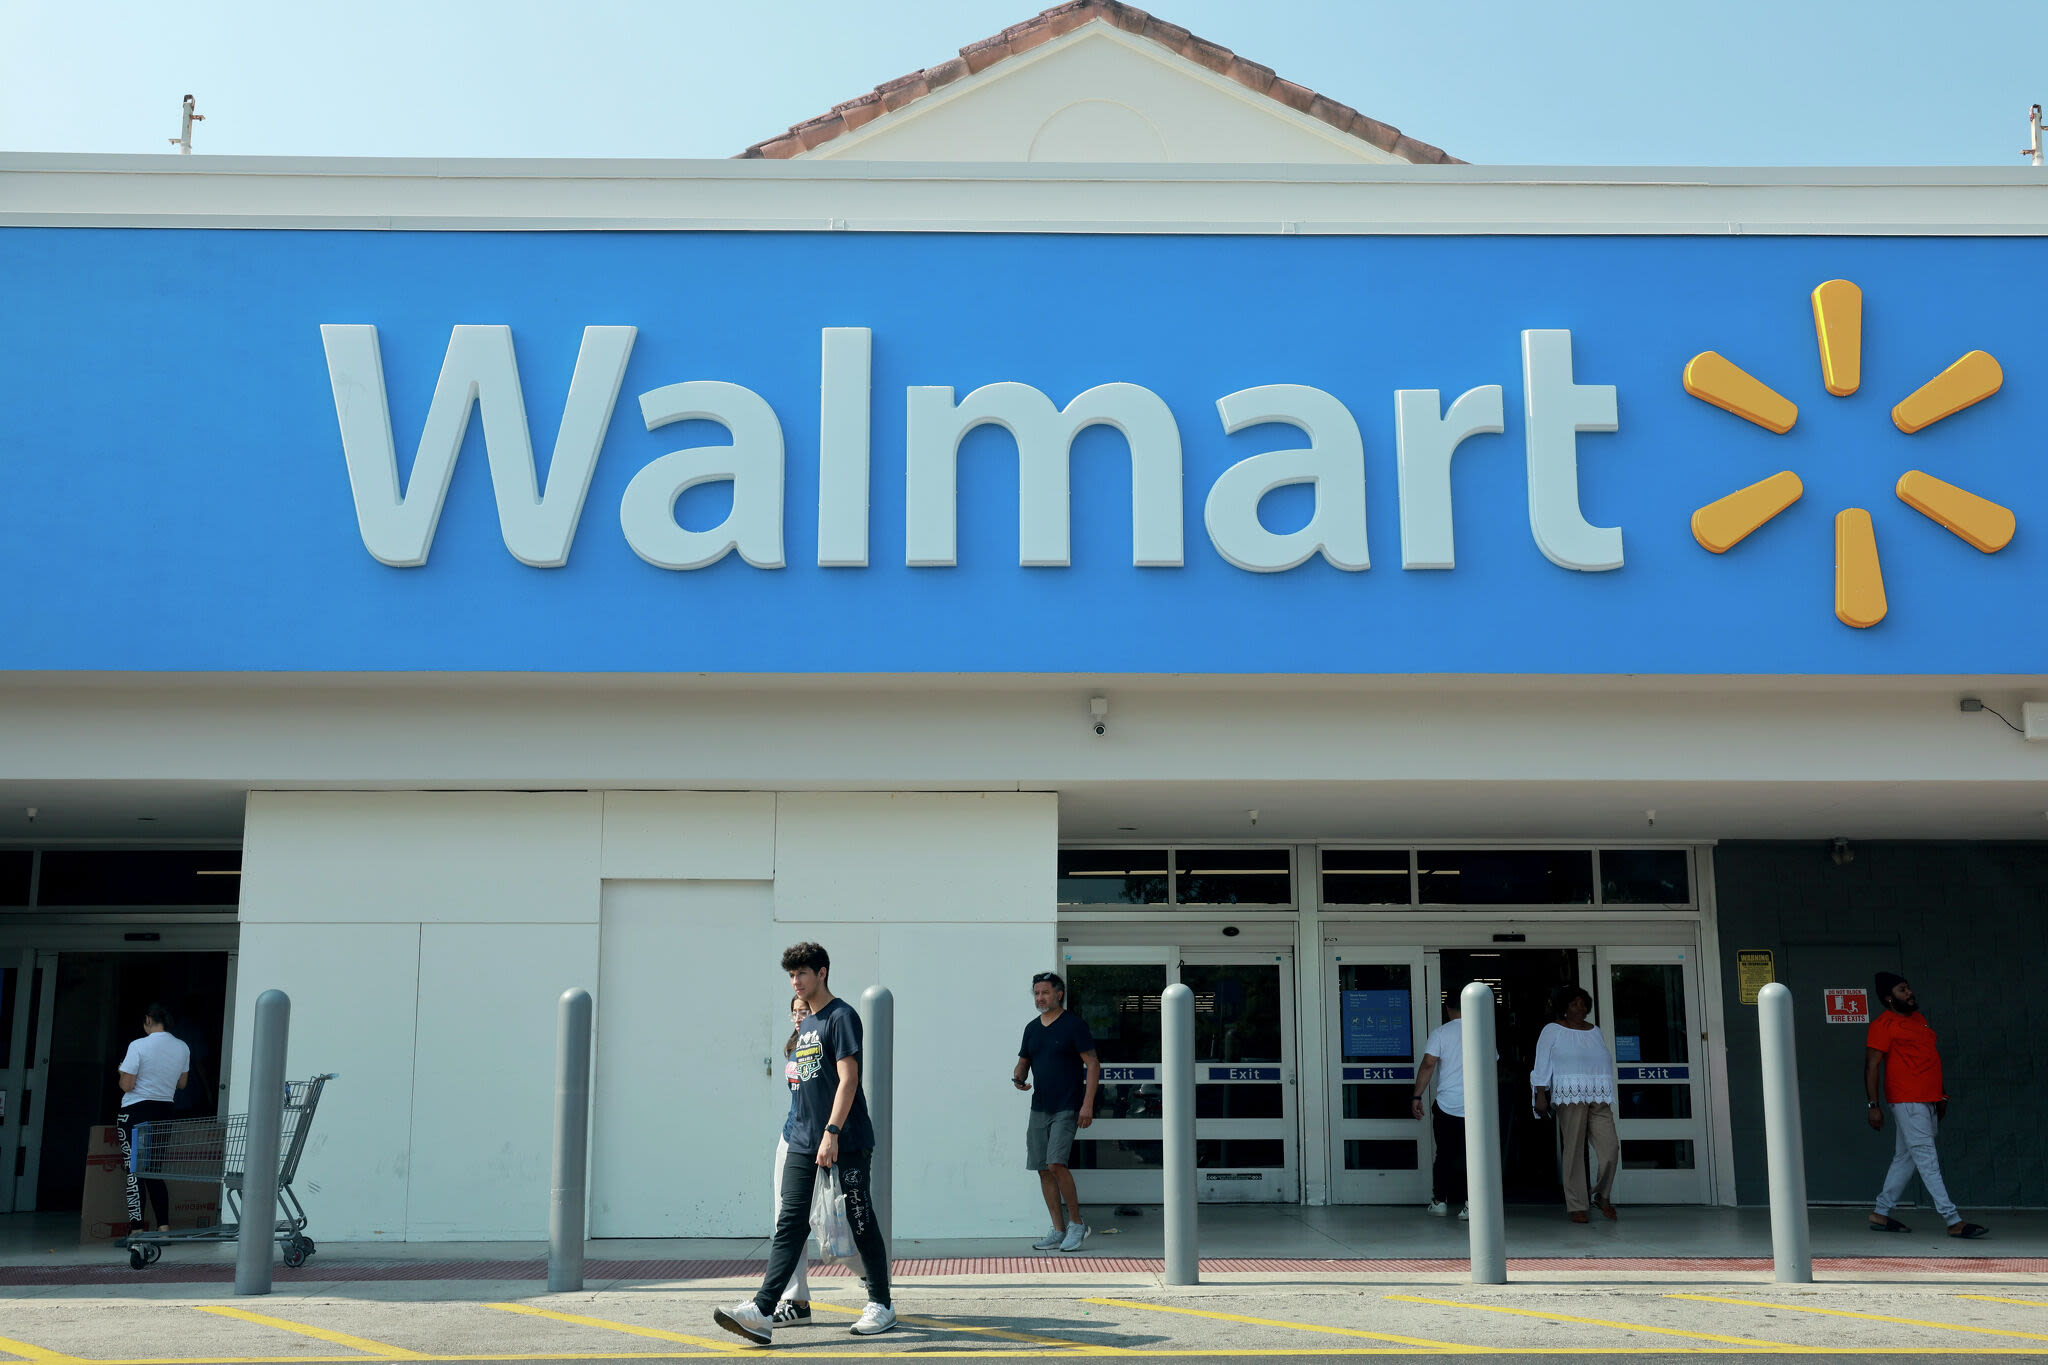 Walmart asks some Texans to relocate or lose their jobs